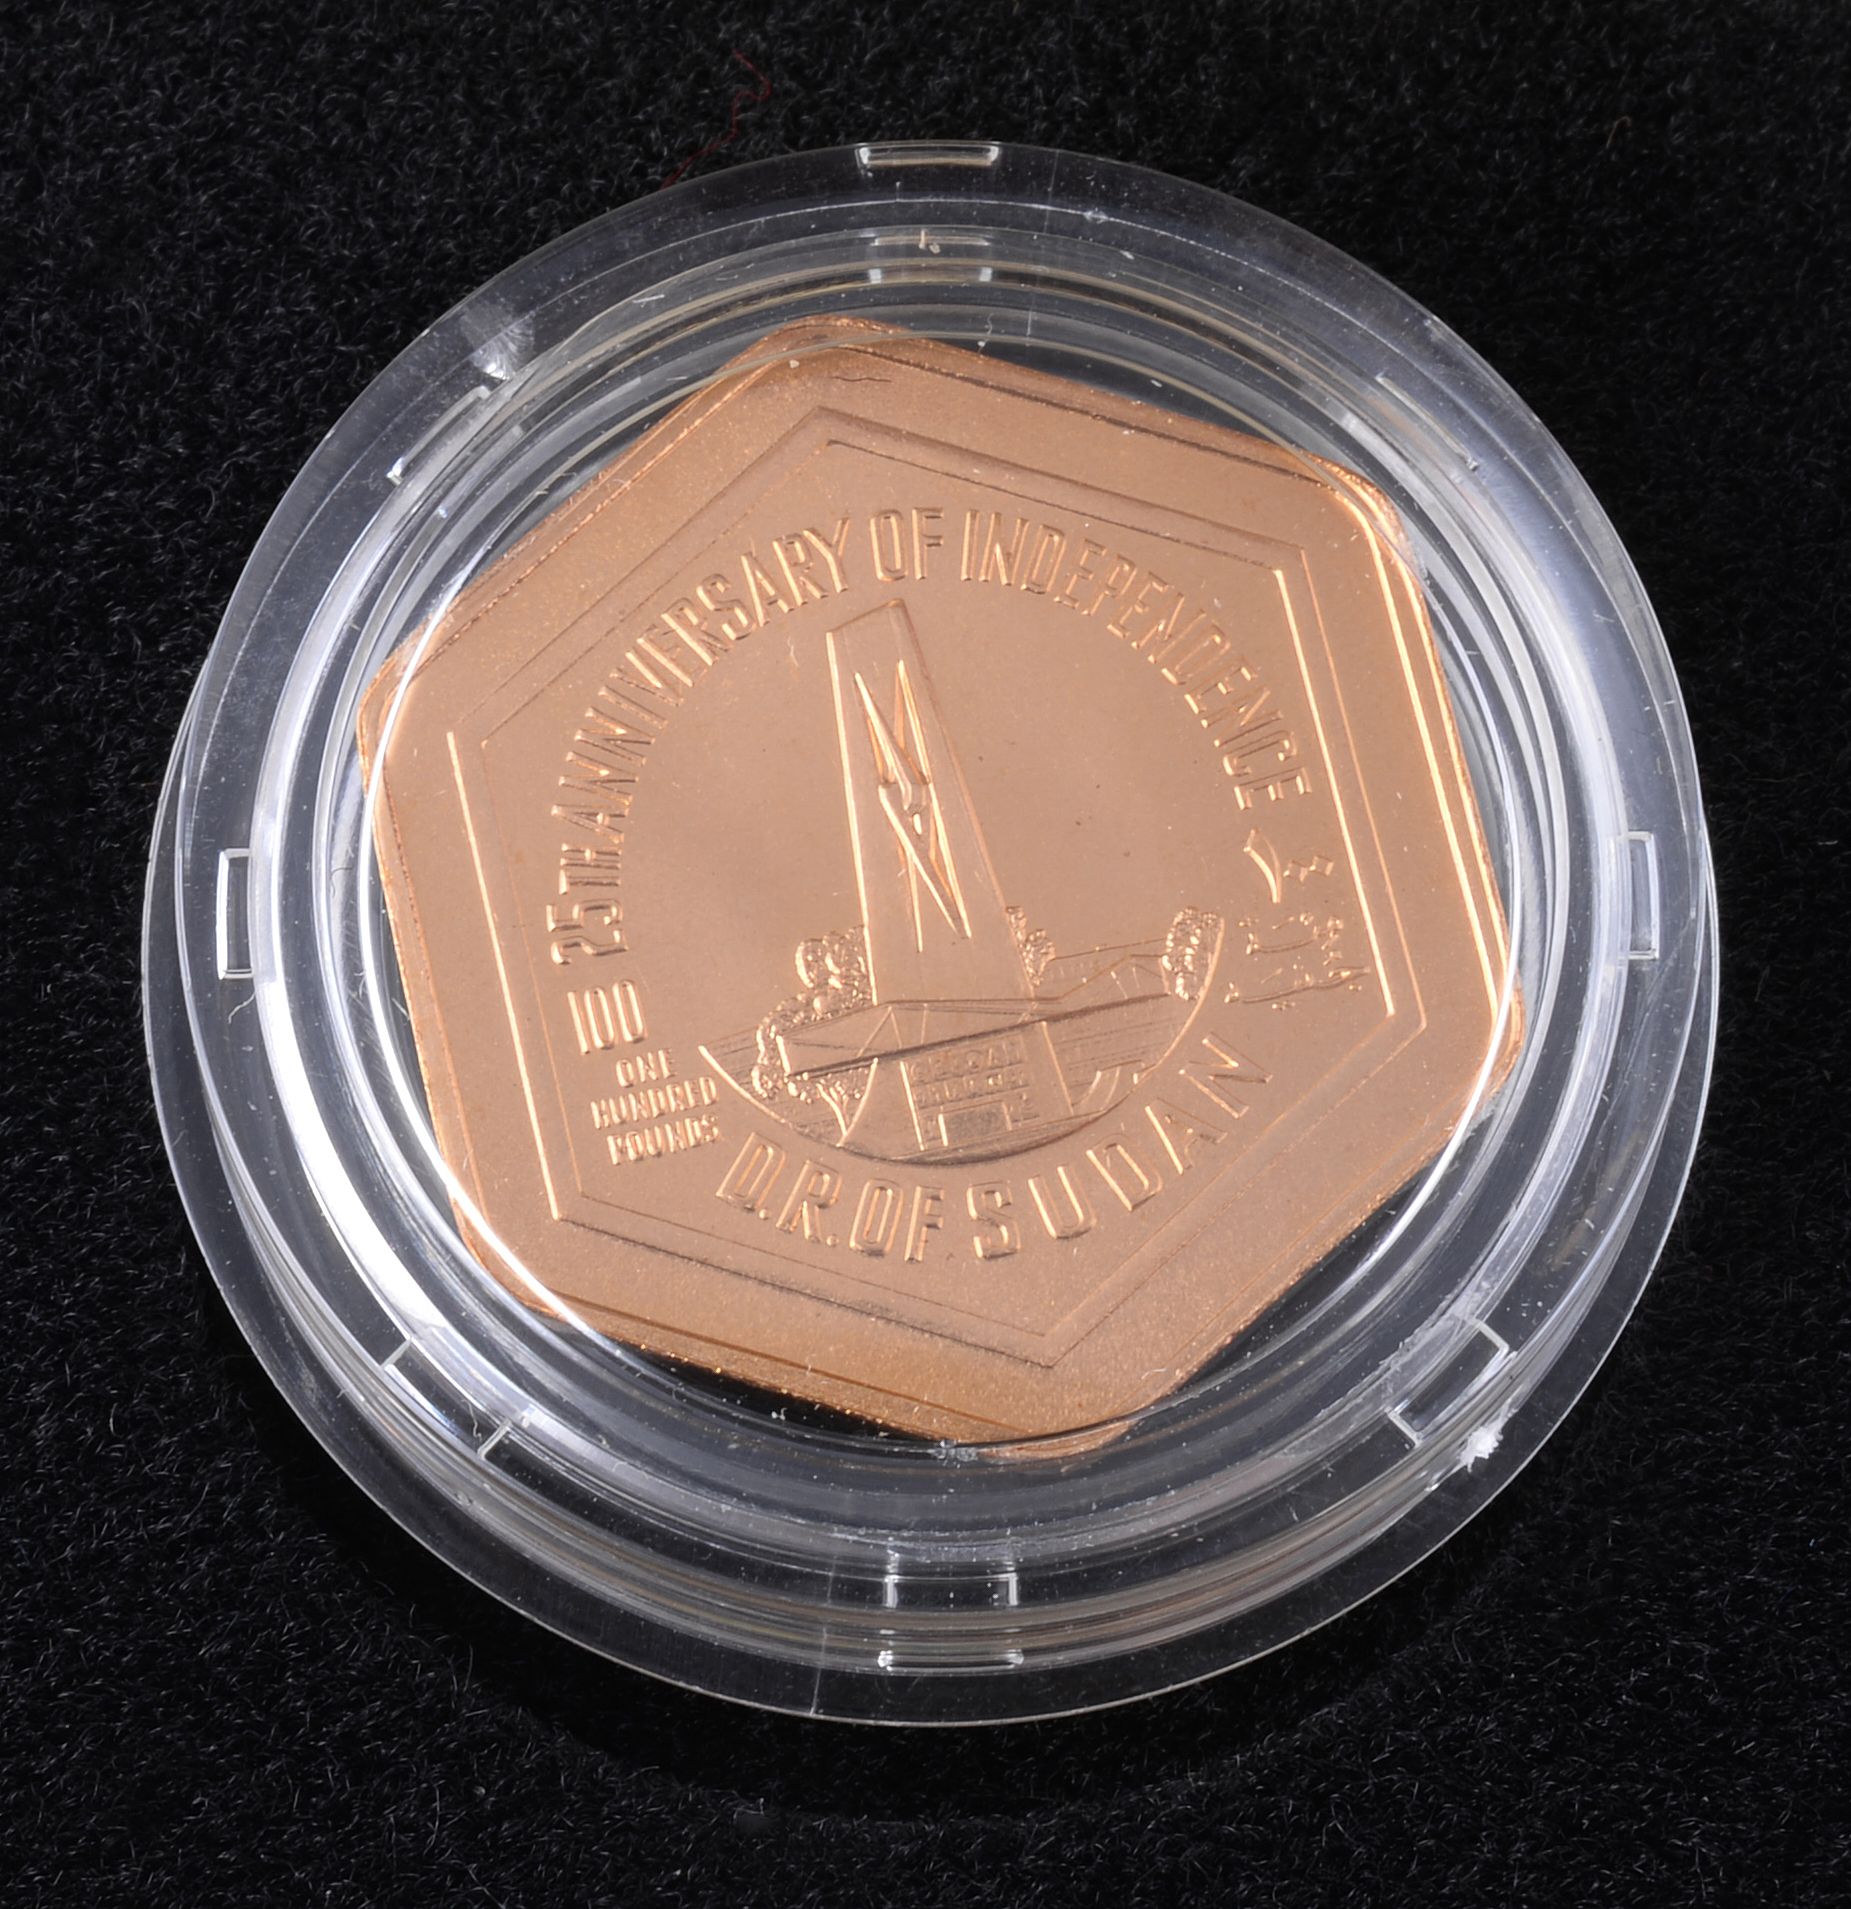 Sudan, 25th Anniversary of Independance 1981, gold 100-Pounds, turbanned bust of President Nimeiri, - Image 3 of 3